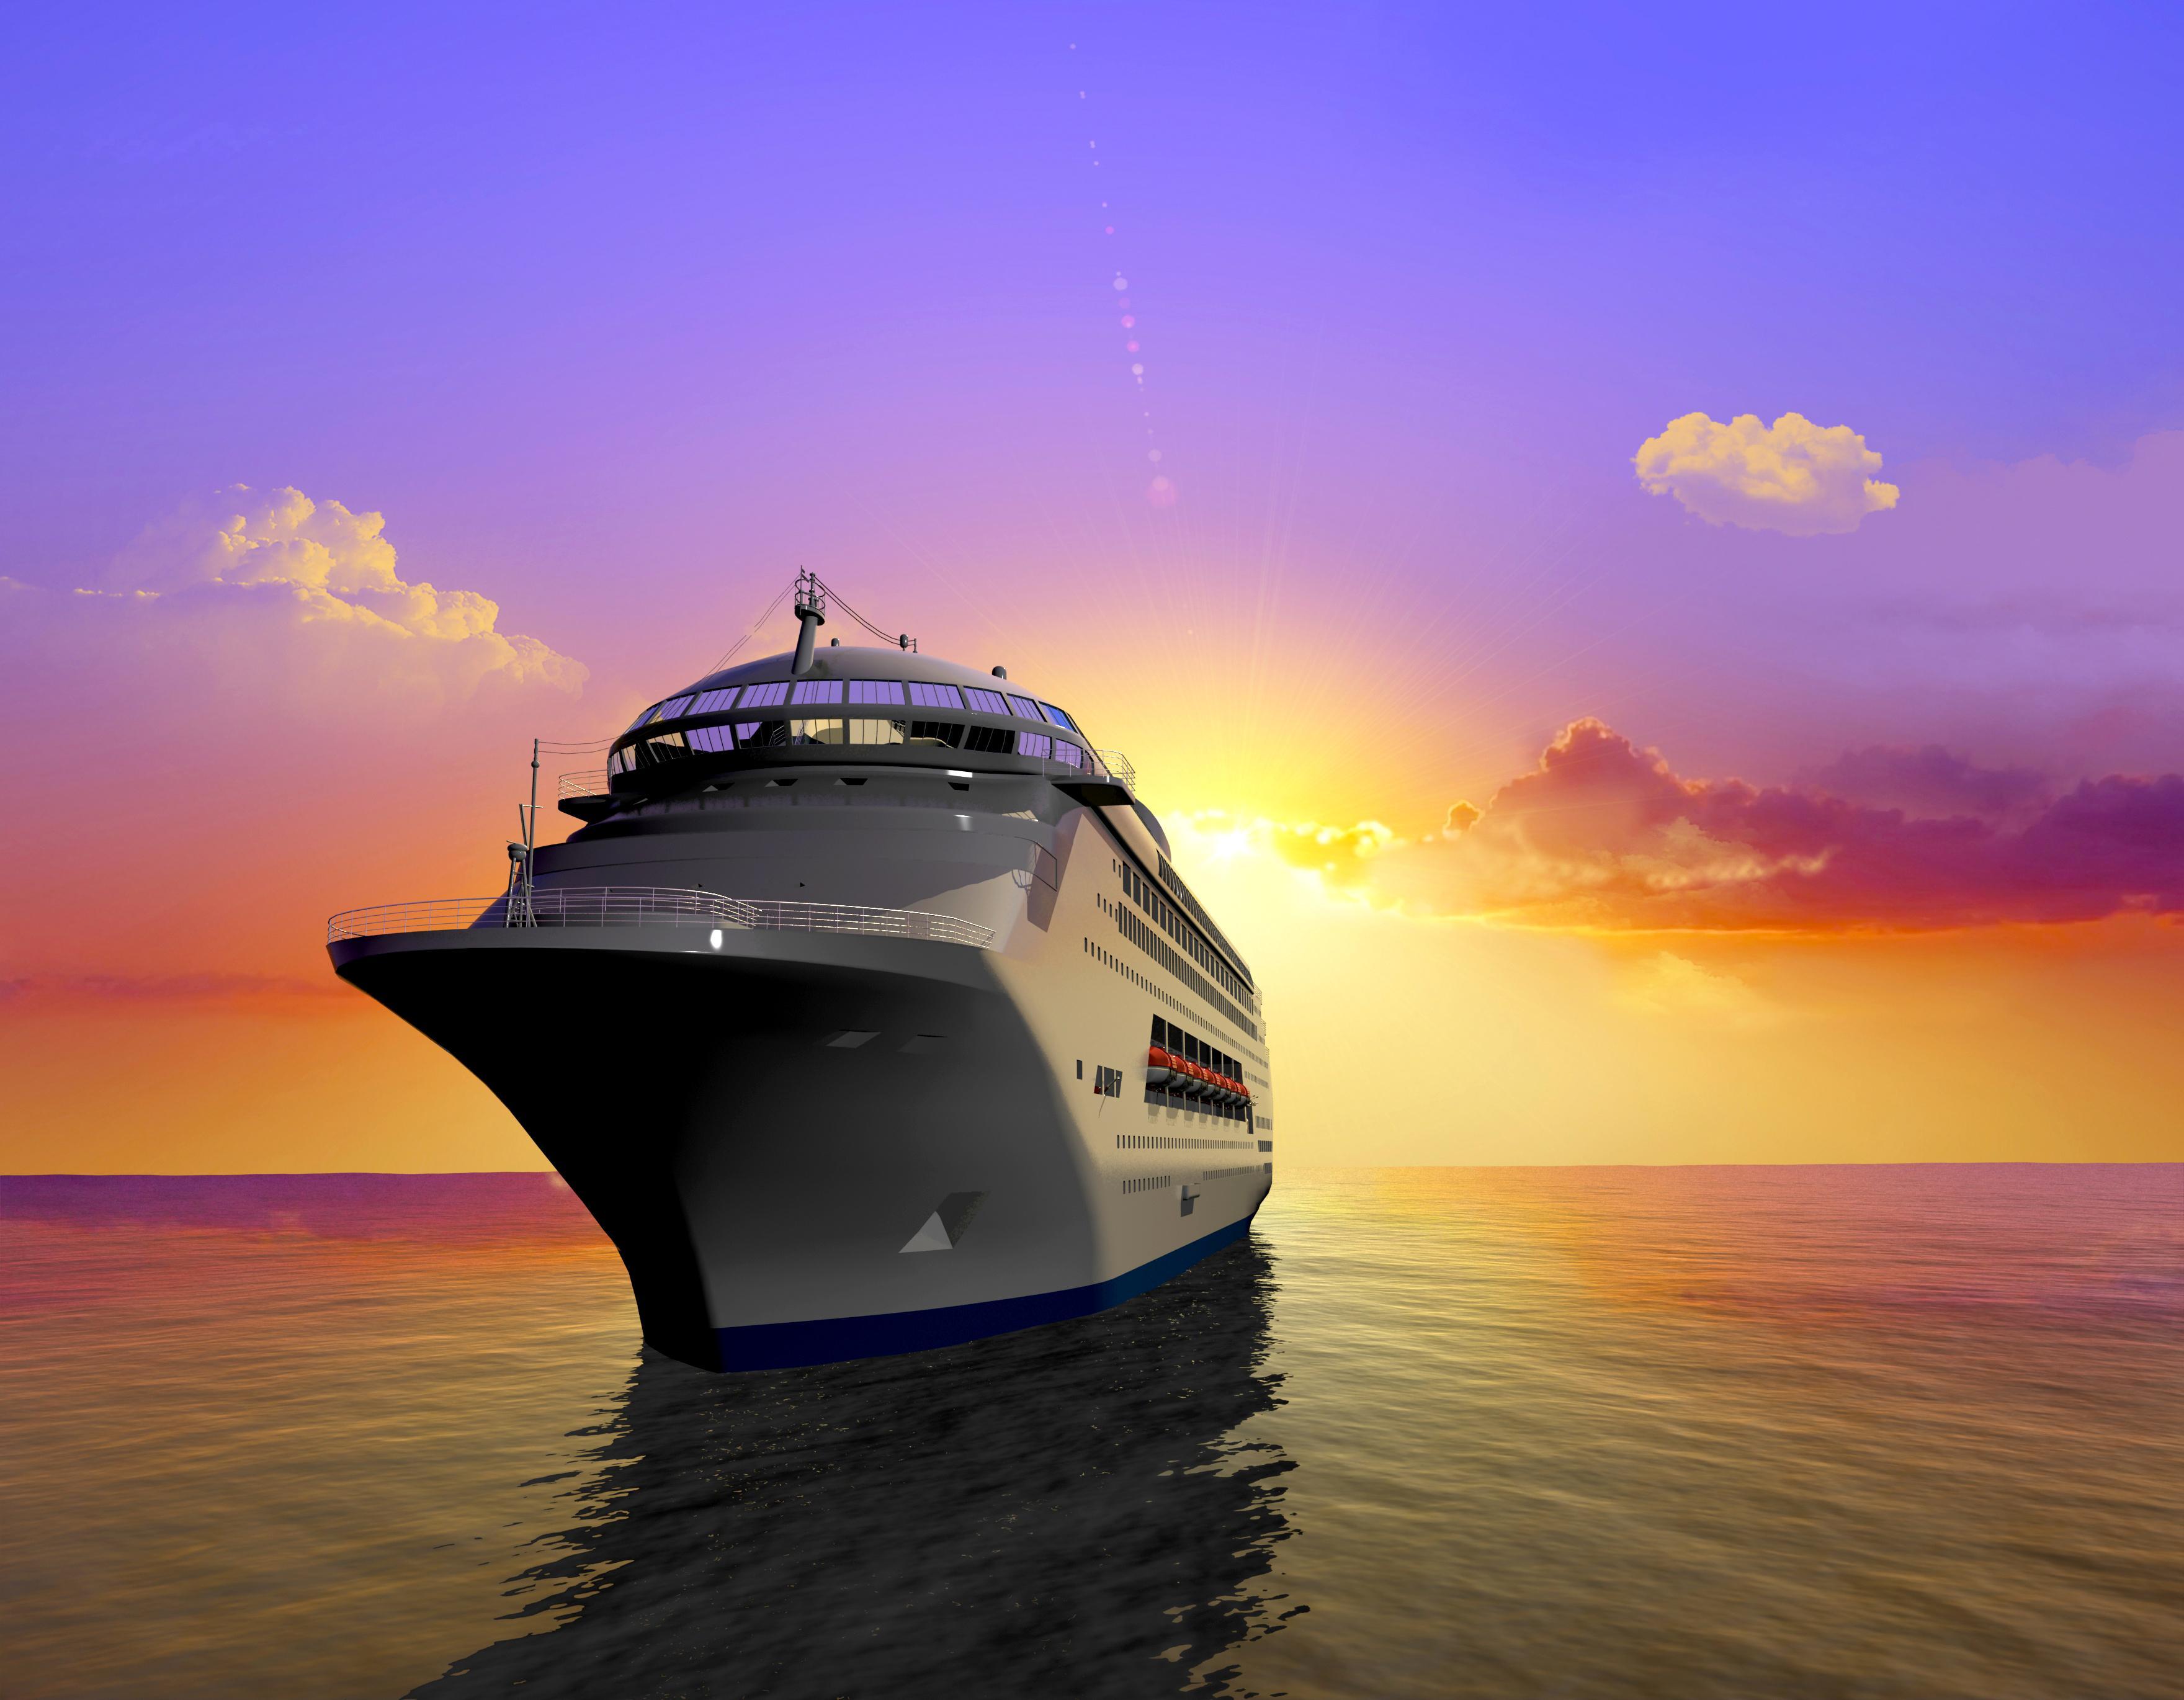 green screen background images cruise ship